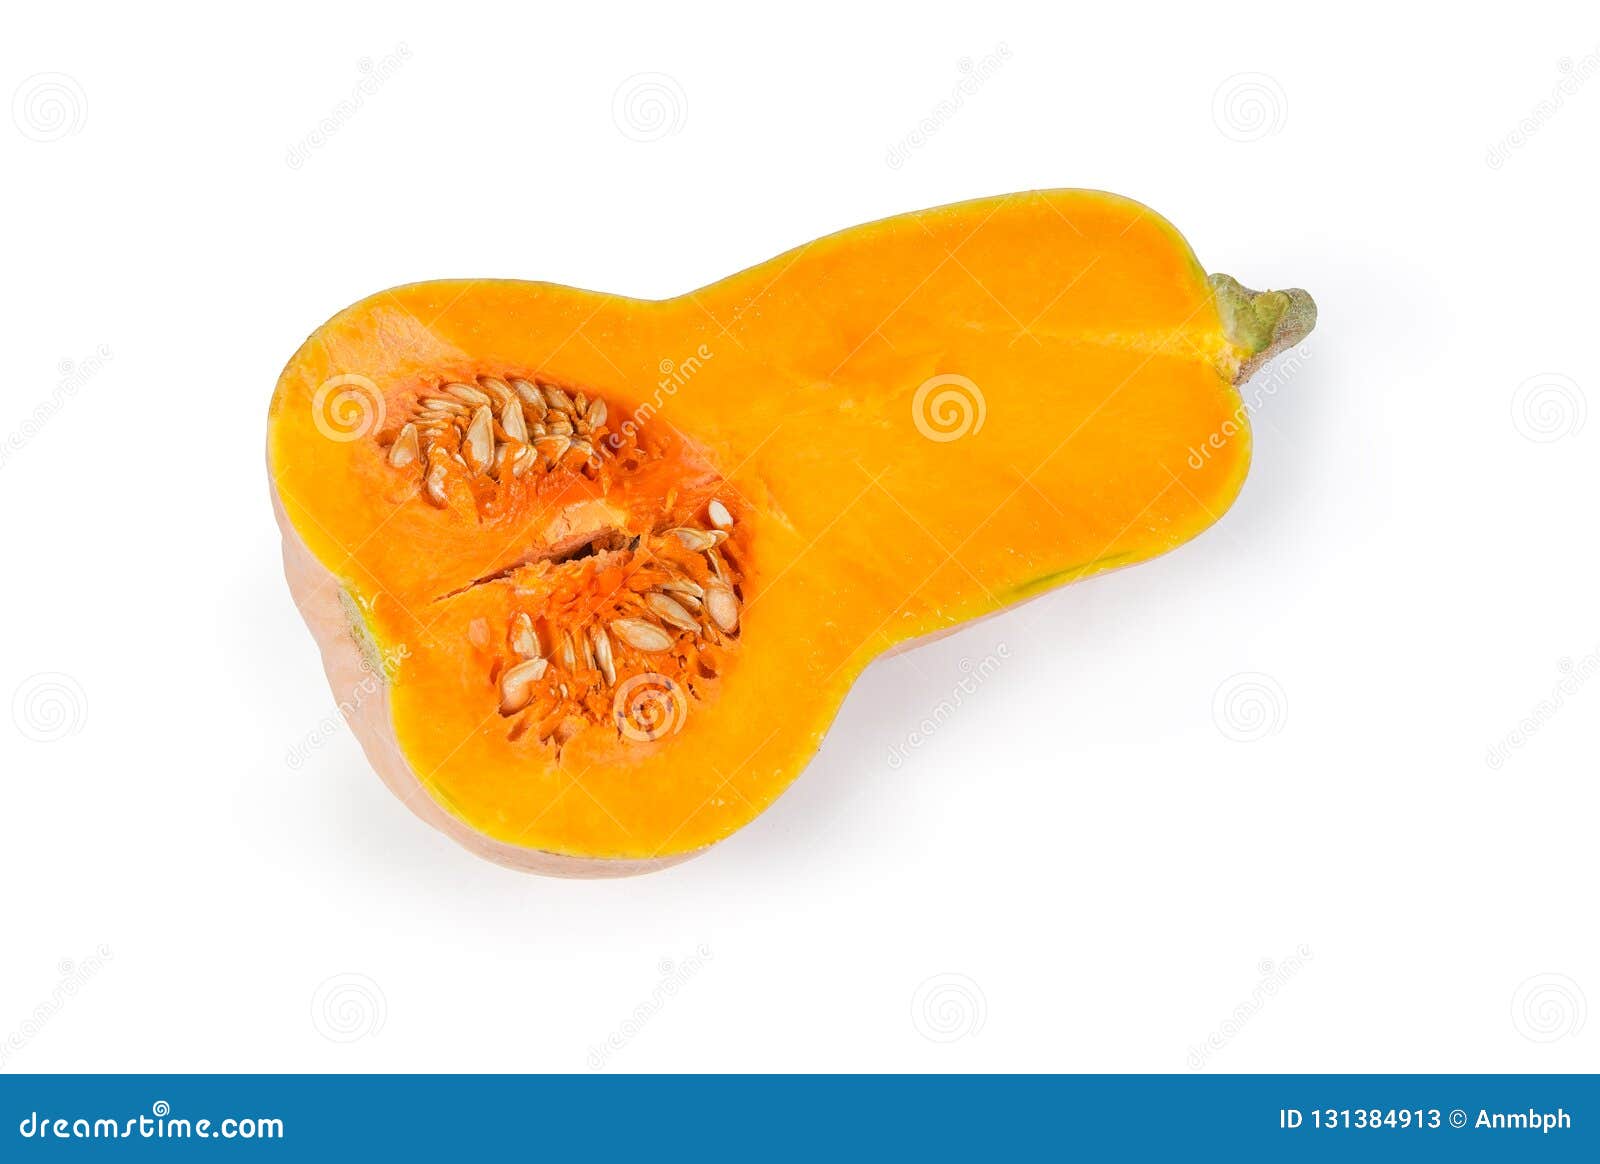 Half Of Butternut Squash On A White Background Stock Image ...